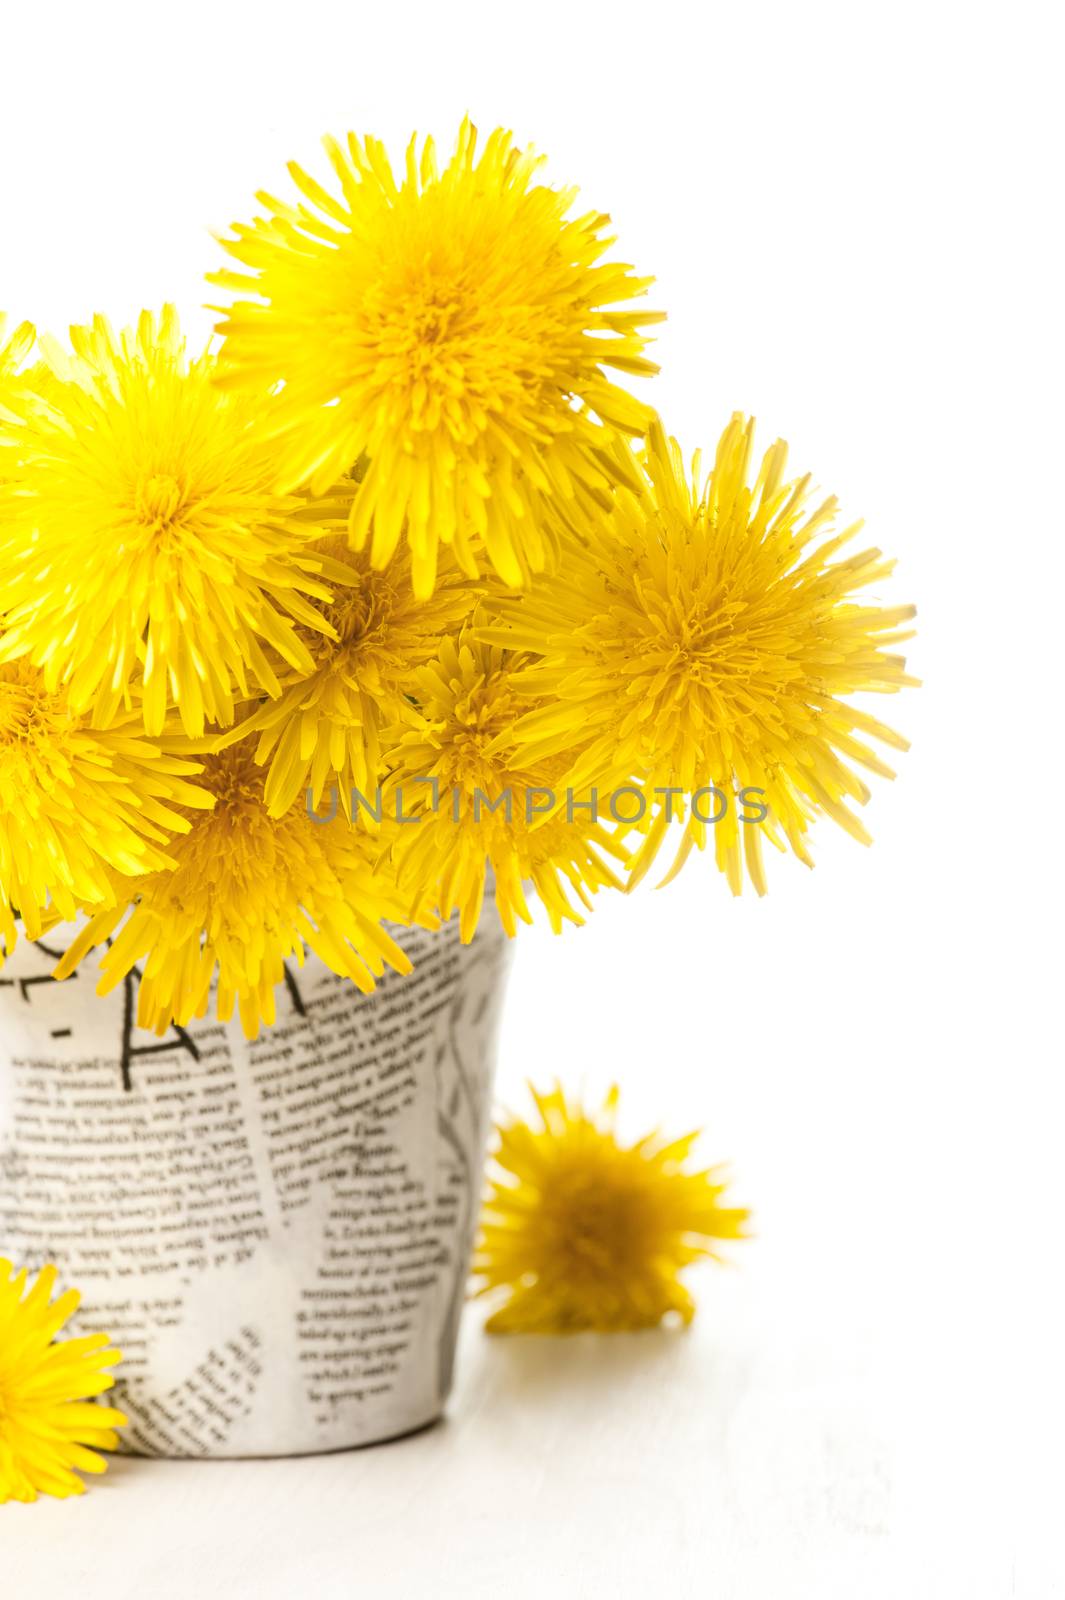 Dandelions in a news paper pot on a white wooden background 